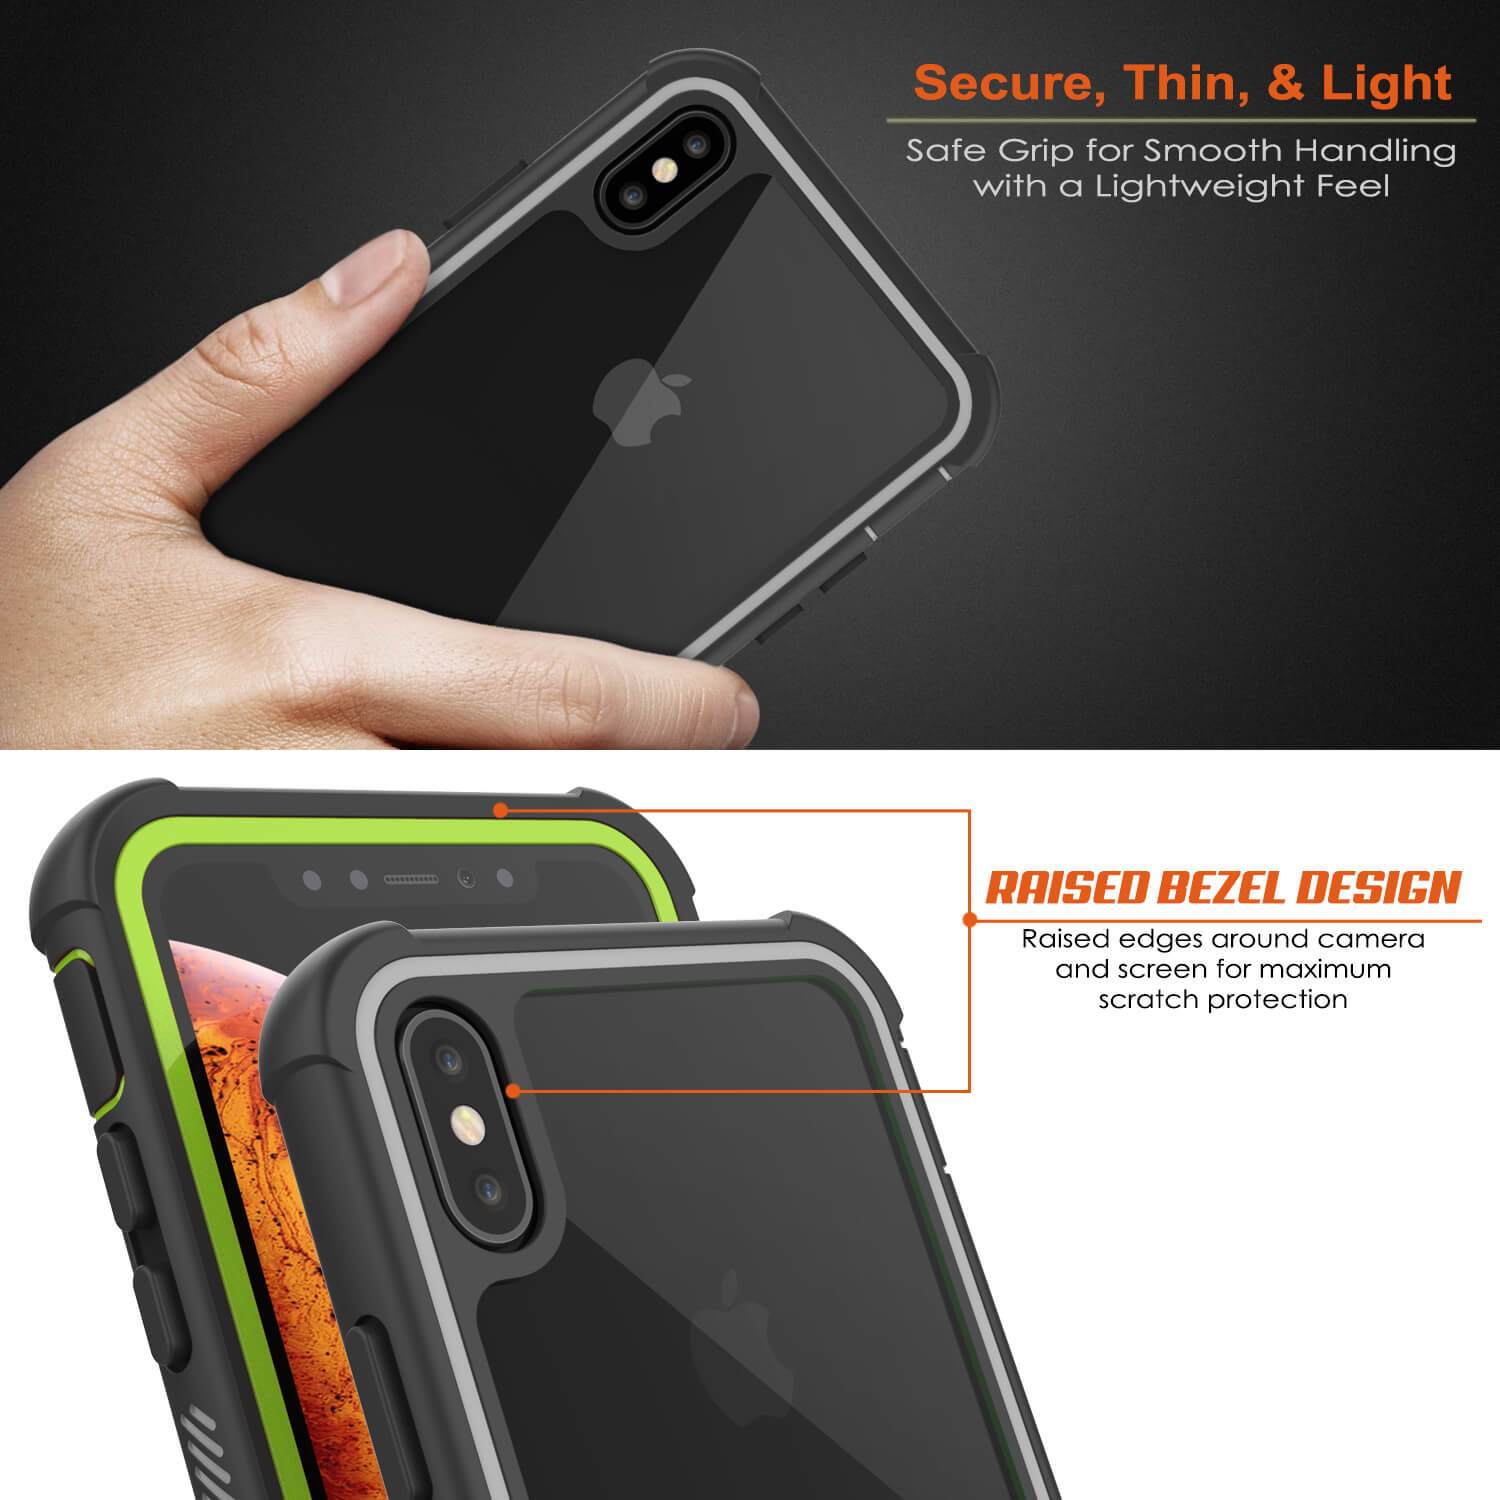 PunkCase iPhone XS Case, [Spartan Series] Clear Rugged Heavy Duty Cover W/Built in Screen Protector [Light-Green]